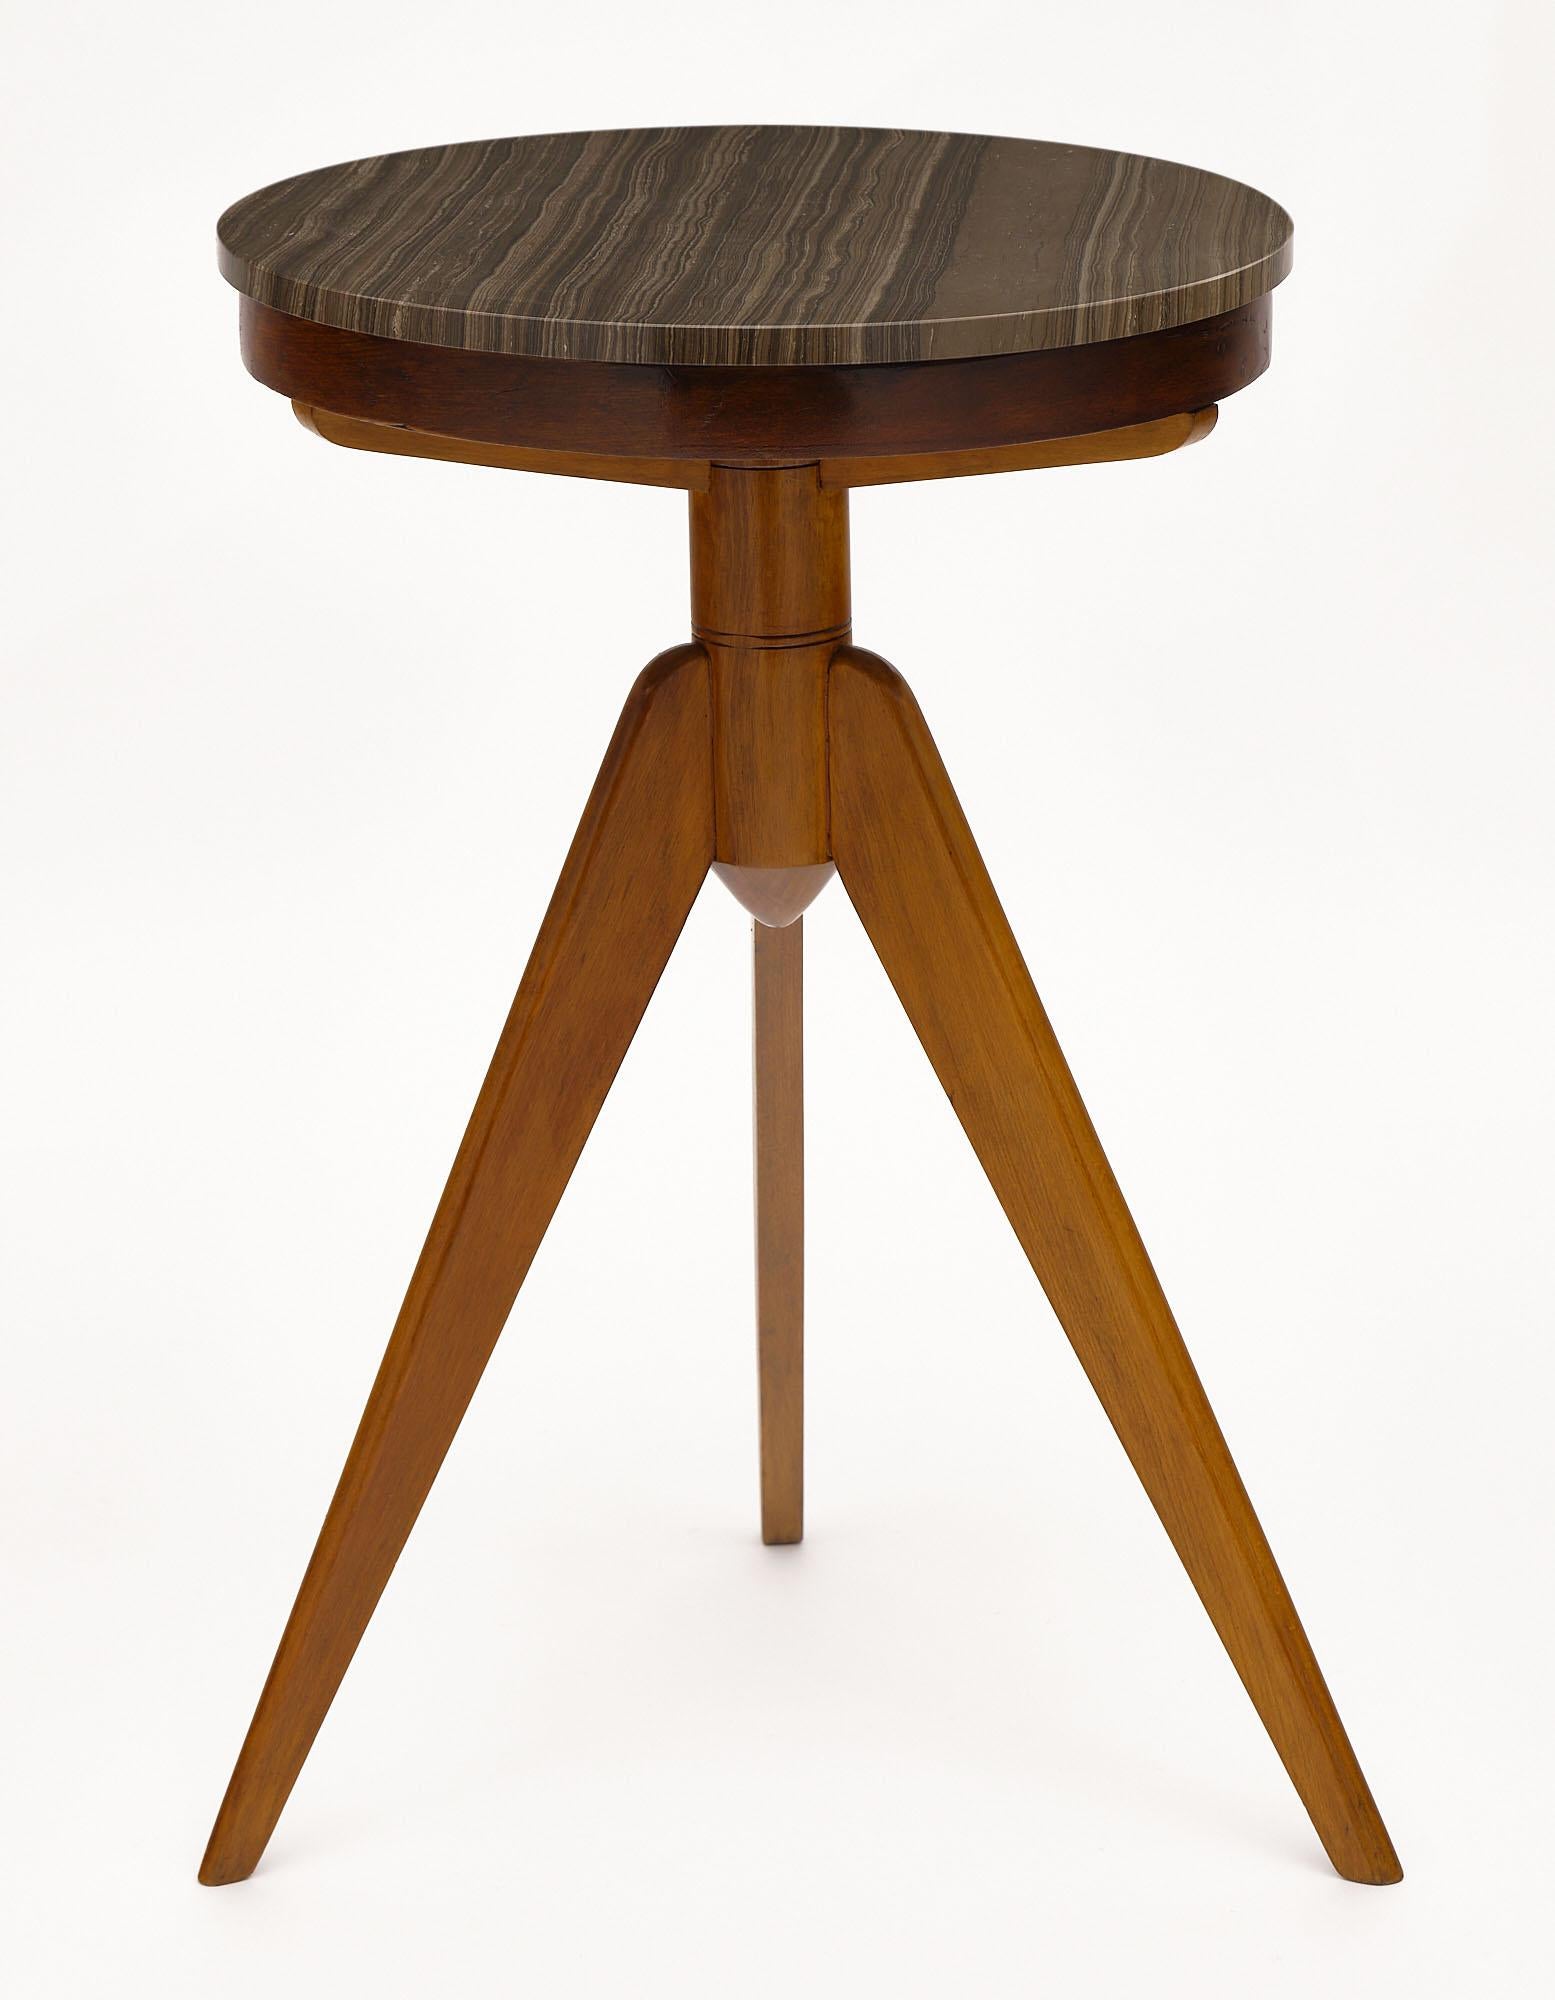 Side table from Italy made with a solid cherry wood tripod base topped with a veined gray marble from the Alps. This table is in the manner of Osvaldo Borsani.